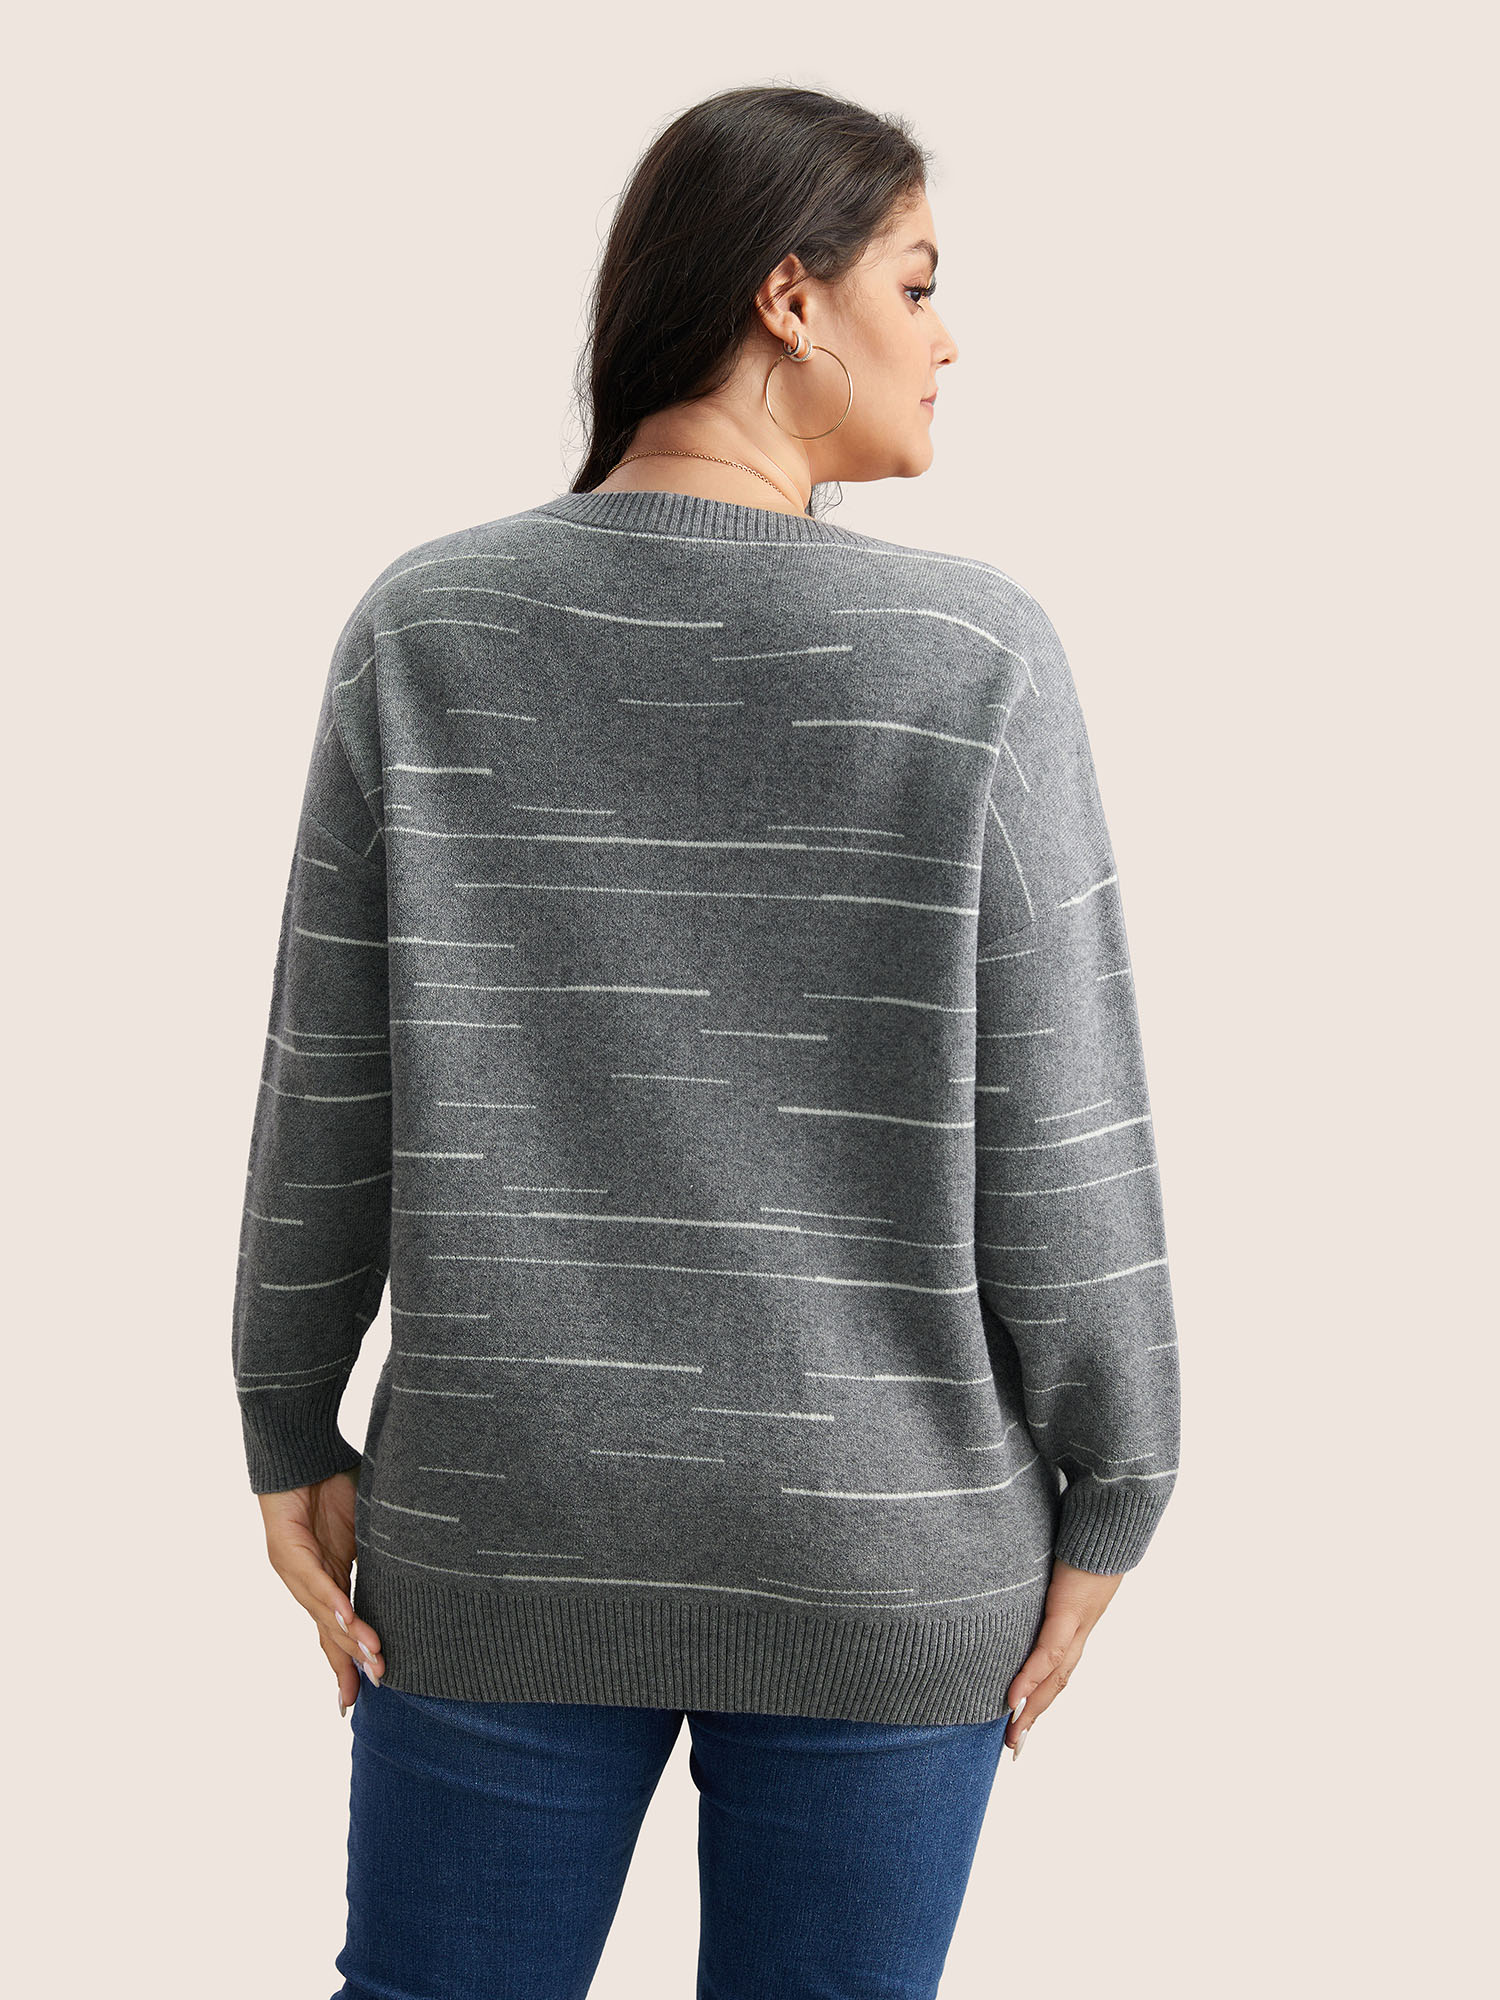 

Plus Size Supersoft Essentials Asymmetrical Striped Round Neck Pullover Gray Women Casual Long Sleeve Round Neck Everyday Pullovers BloomChic